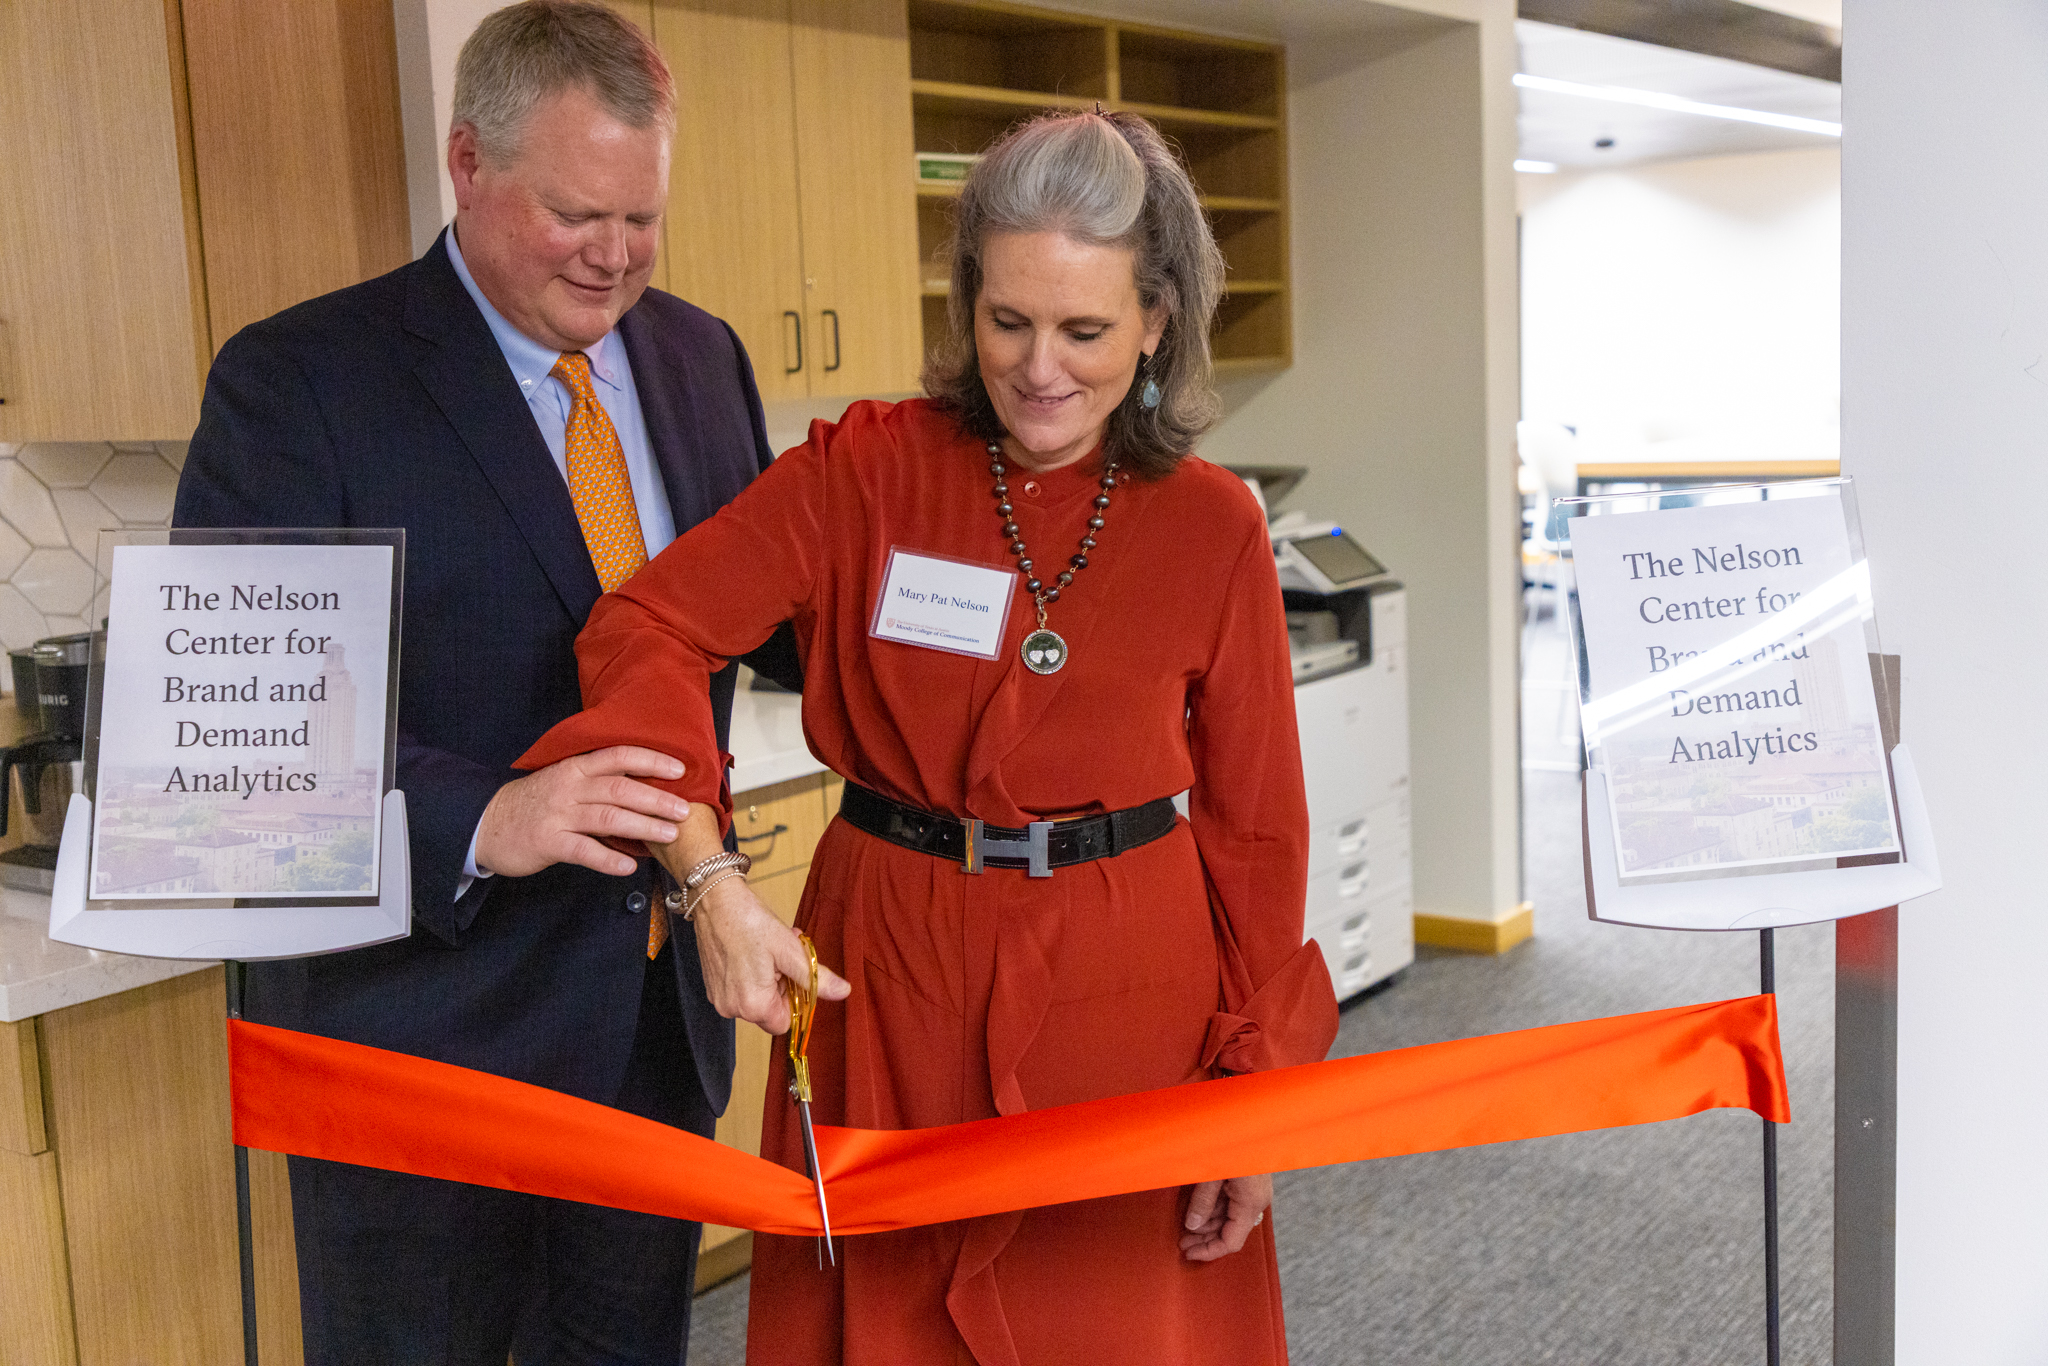 Jim and Mary Pat Nelson at a ribbon-cutting for the new Nelson Center for Brand and Demand Analytics